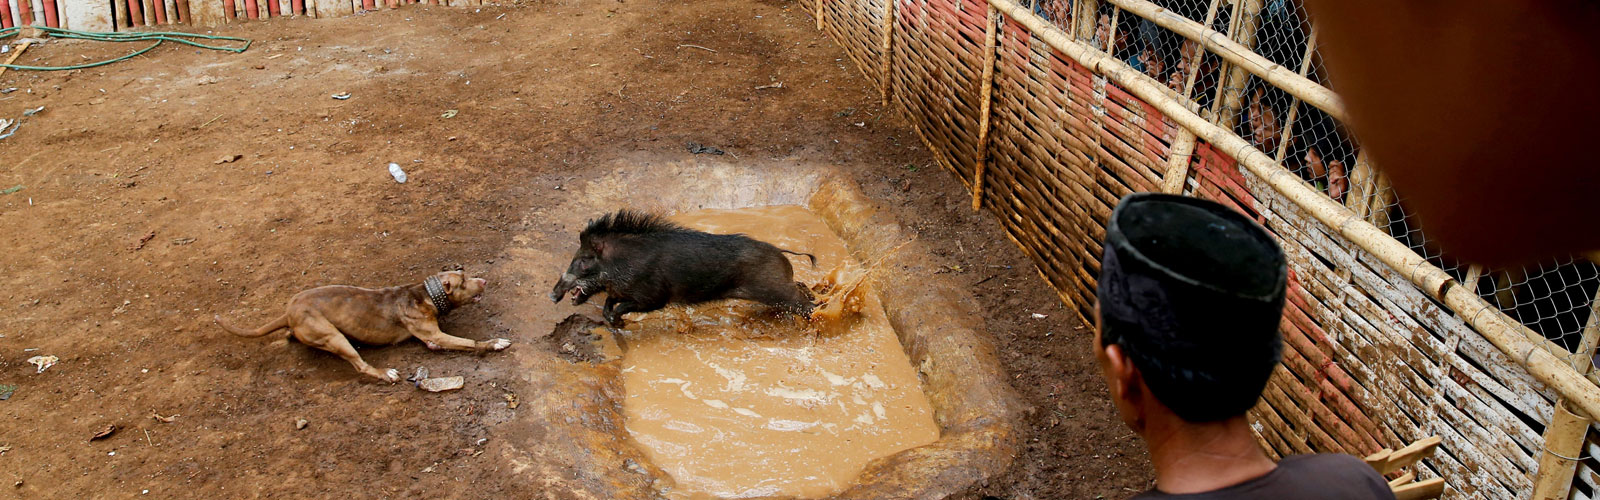 Indonesian villages pit wild boars against dogs